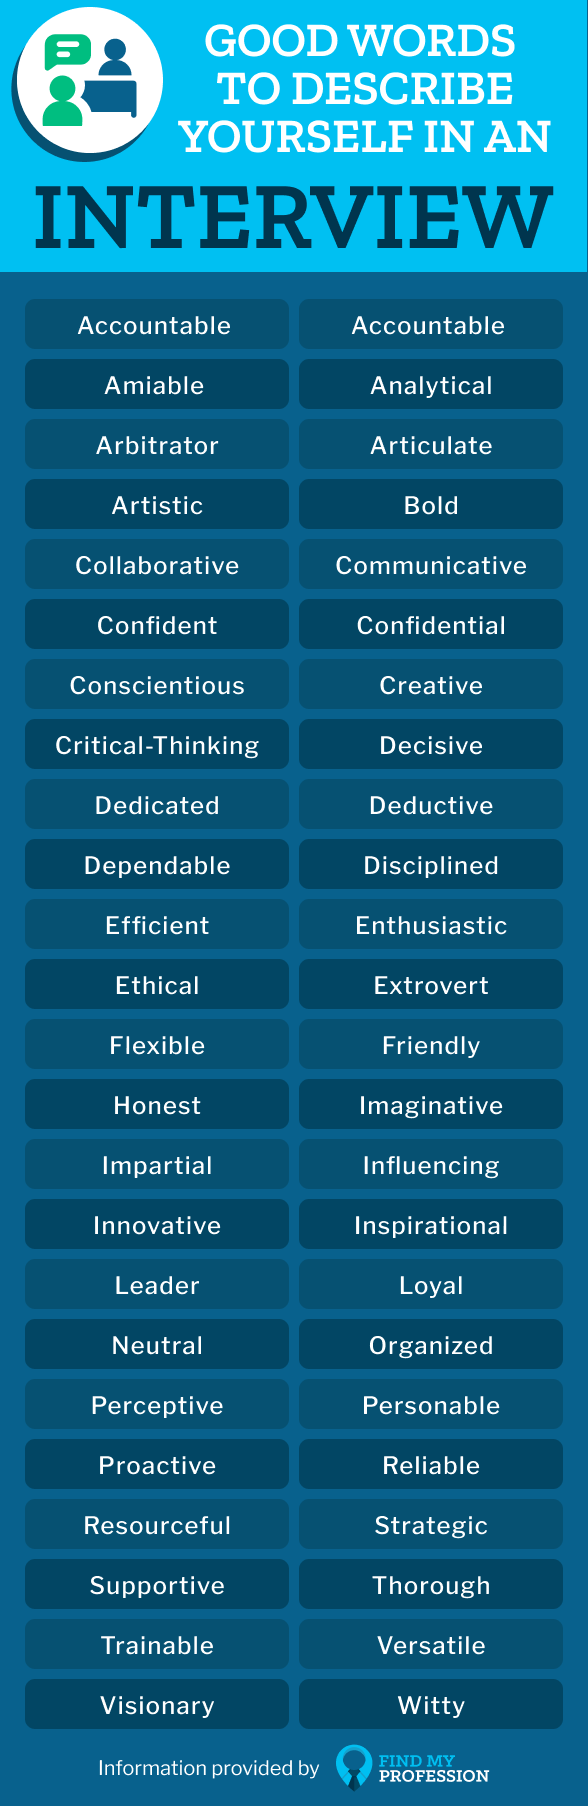 Good Words To Describe Yourself In An Interview Mobile 